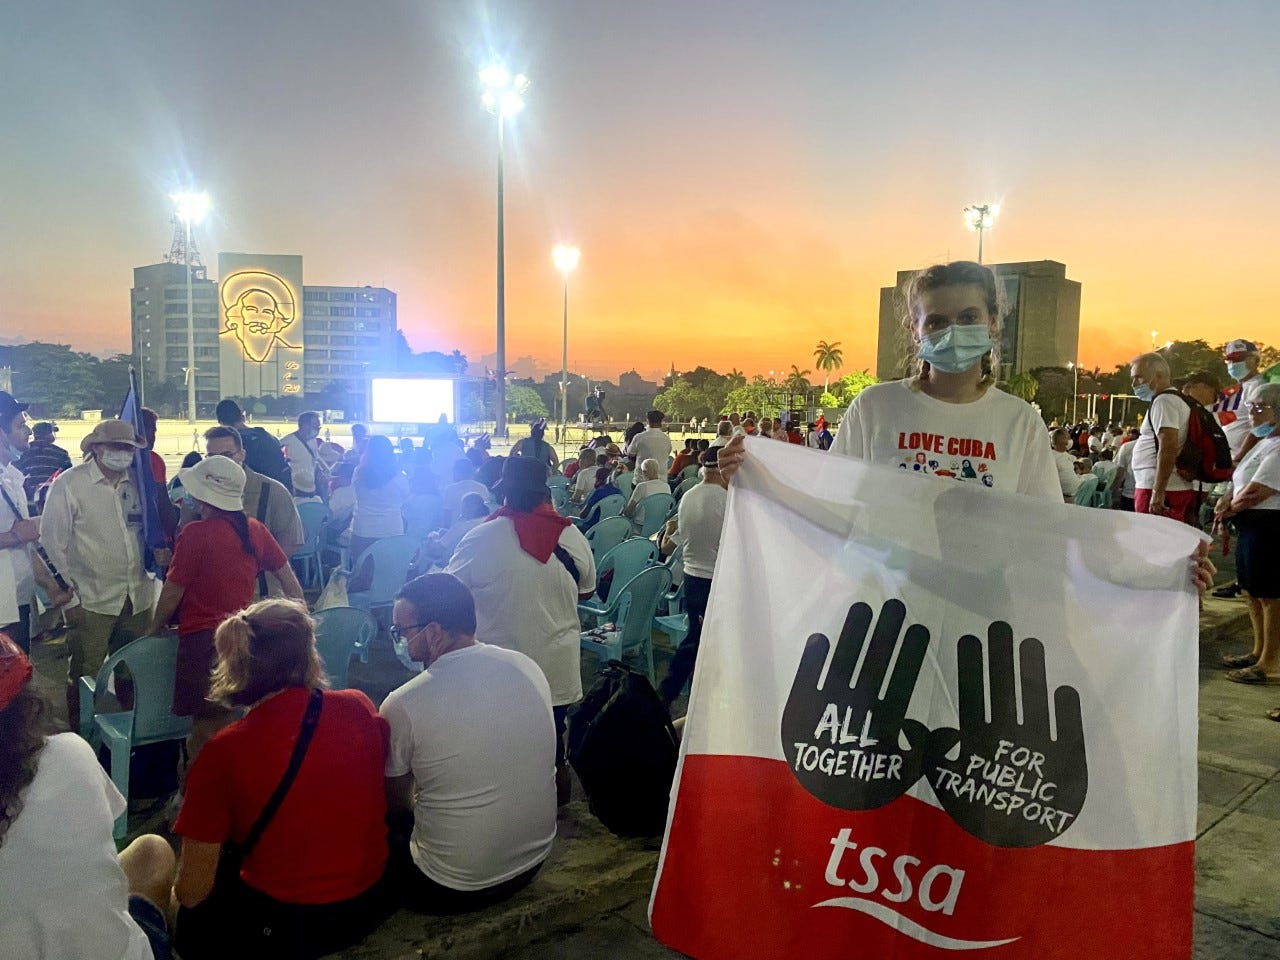 Maisie D stands holding a TSSA Banner in front of a large group of people wearing red and white t-shirts with their backs facing the camera. They are facing a screen and a building with an image projecte don it. Maisie has pigtails and is wearing a face mask.